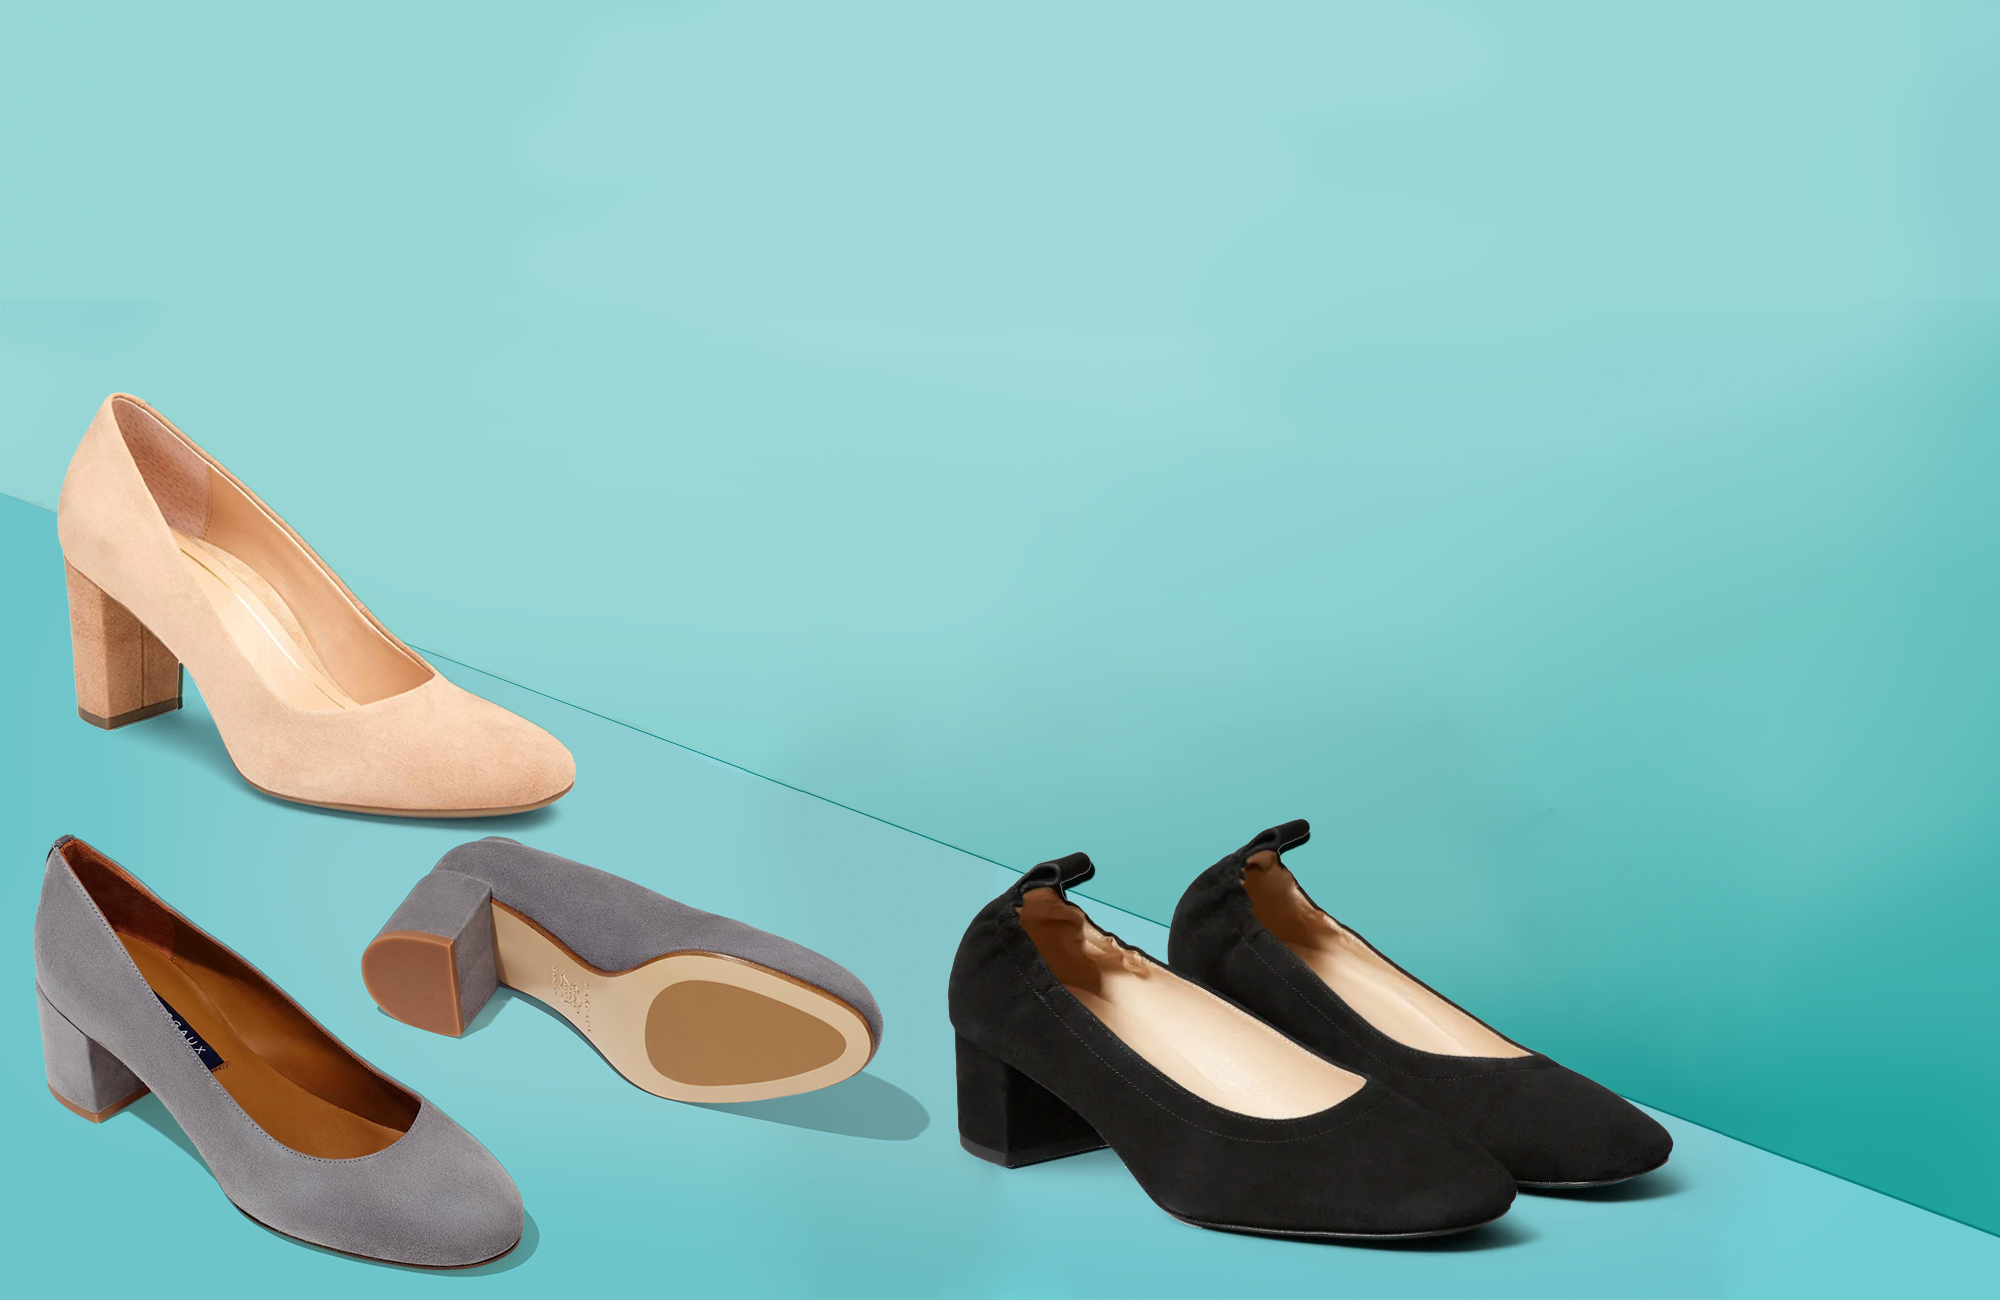 11 Most Comfortable Heels for 2021 - Best Heeled Shoes for Work